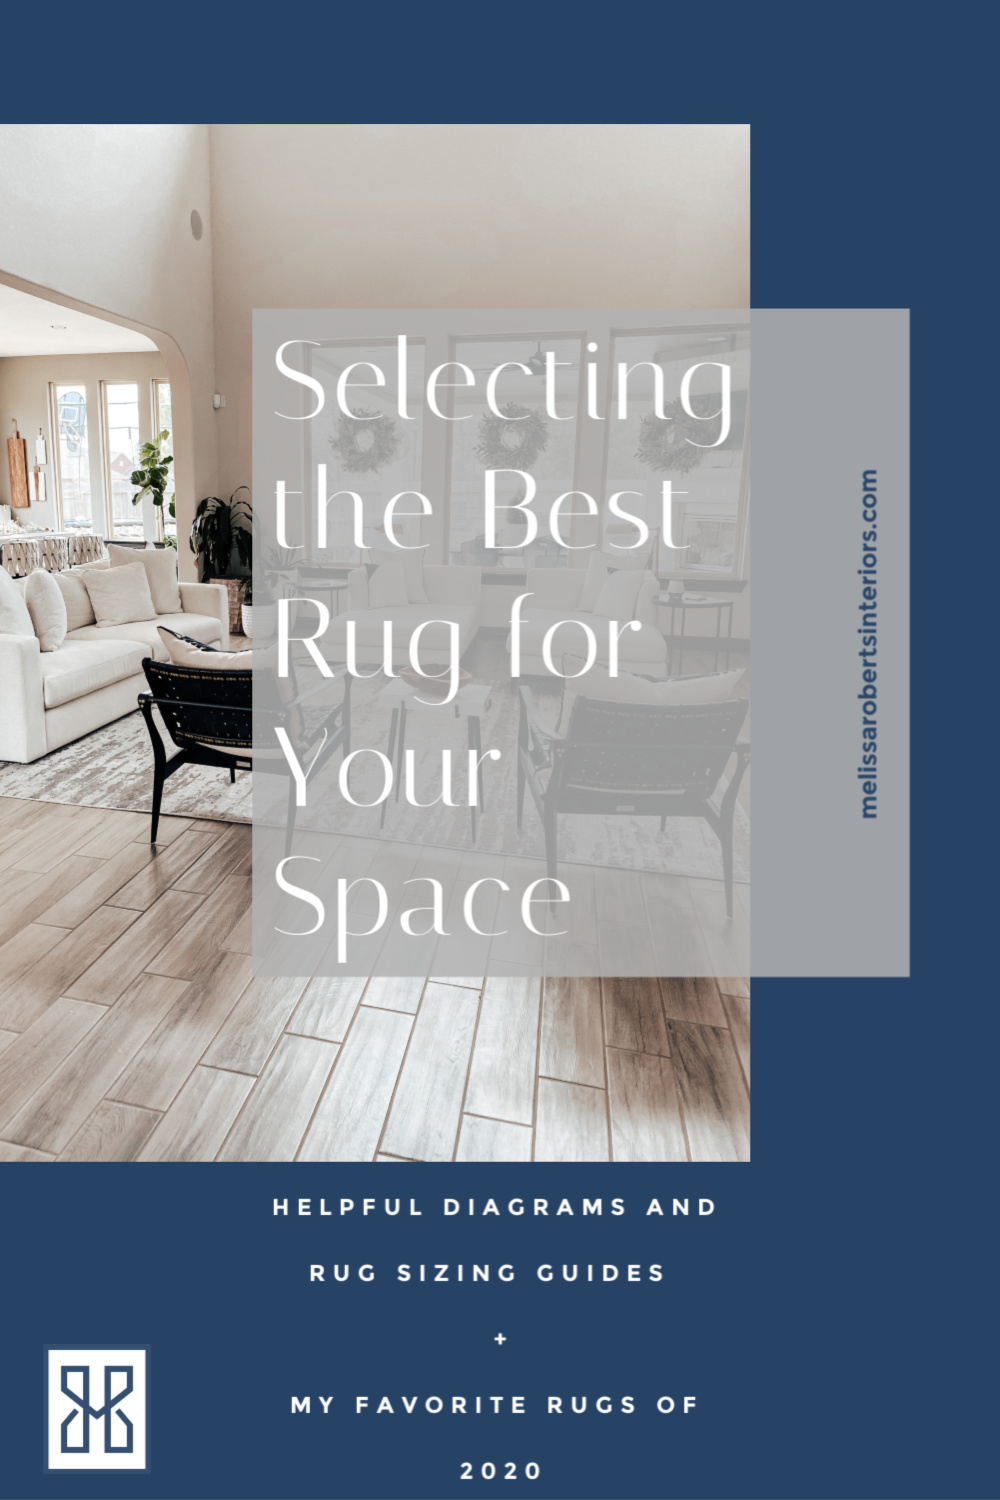 MRI, Melissa Roberts Interiors, Houston Interior Designer, Houston Interior Design, Rug Sizing, Rug Sizing Guide, Rugs 2020, Modern Rugs, Chic Rugs, Affordable Rugs, Cheap Rugs, 6’x9’ Rug, 8’x10’ Rug, 10’x12’ Rug, Rugs Under Bed, Living Room Rug, How to Place a Rug, Rug in Bedroom, Colorful Rugs, White Rugs, Unique Rugs, Rug Sizing Living Room, Rug Sizing Bedroom, Durable Rugs, Rug Fabrics, Kid Friendly Rugs, Dog Friendly Rugs, Easy to Clean Rugs, Indoor/Outdoor Rugs, Polyester Rugs, Ruggable Rugs, Washable Rugs